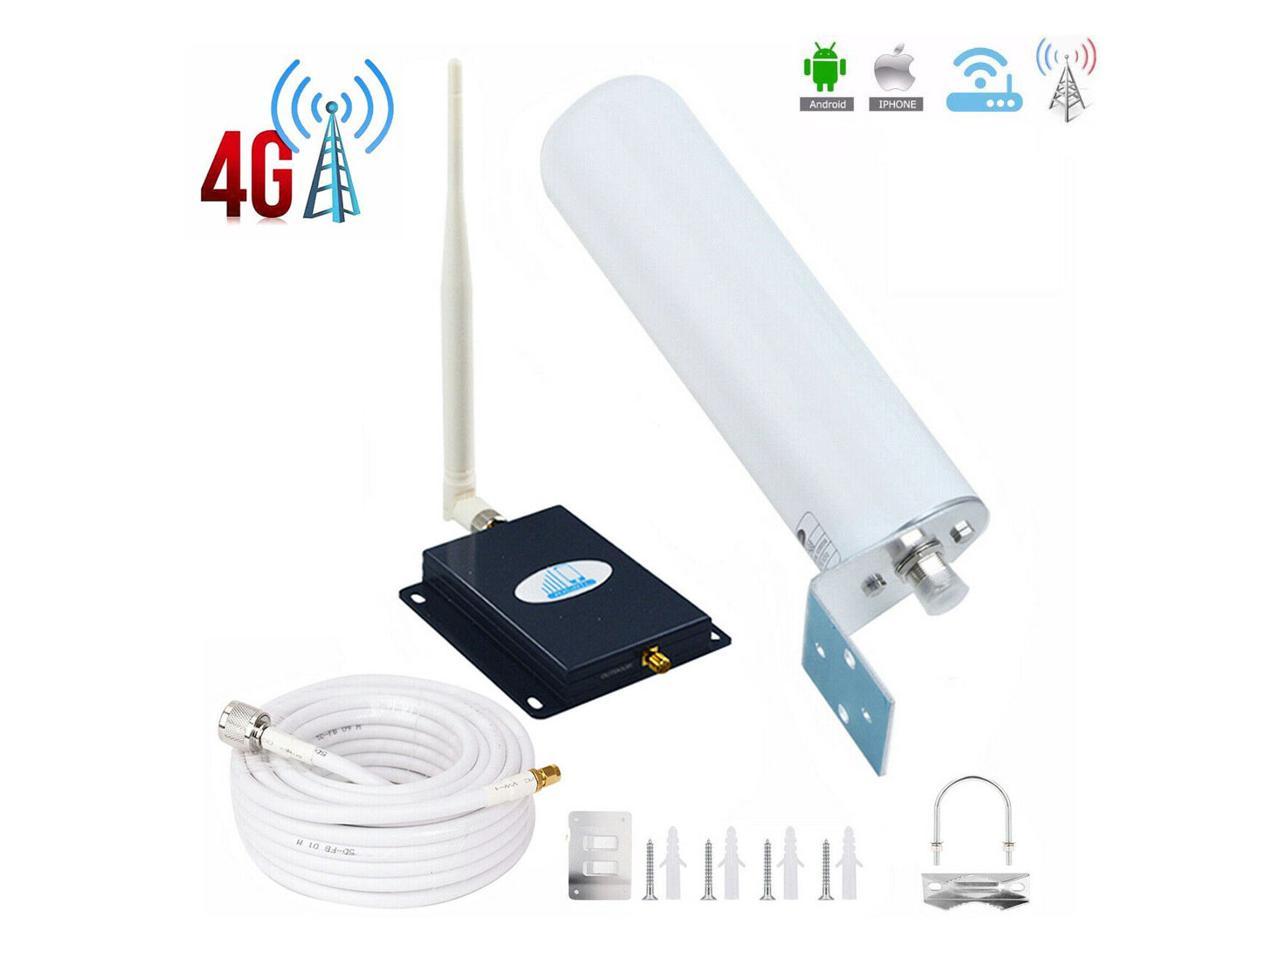 Cell Phone Signal Booster Verizon Compatible Mobile Phone Signal Booster Repeater Band13 700Mhz FDD Boosts 4G LTE Voice and Data for Verizon with Antennas Kit for Home 